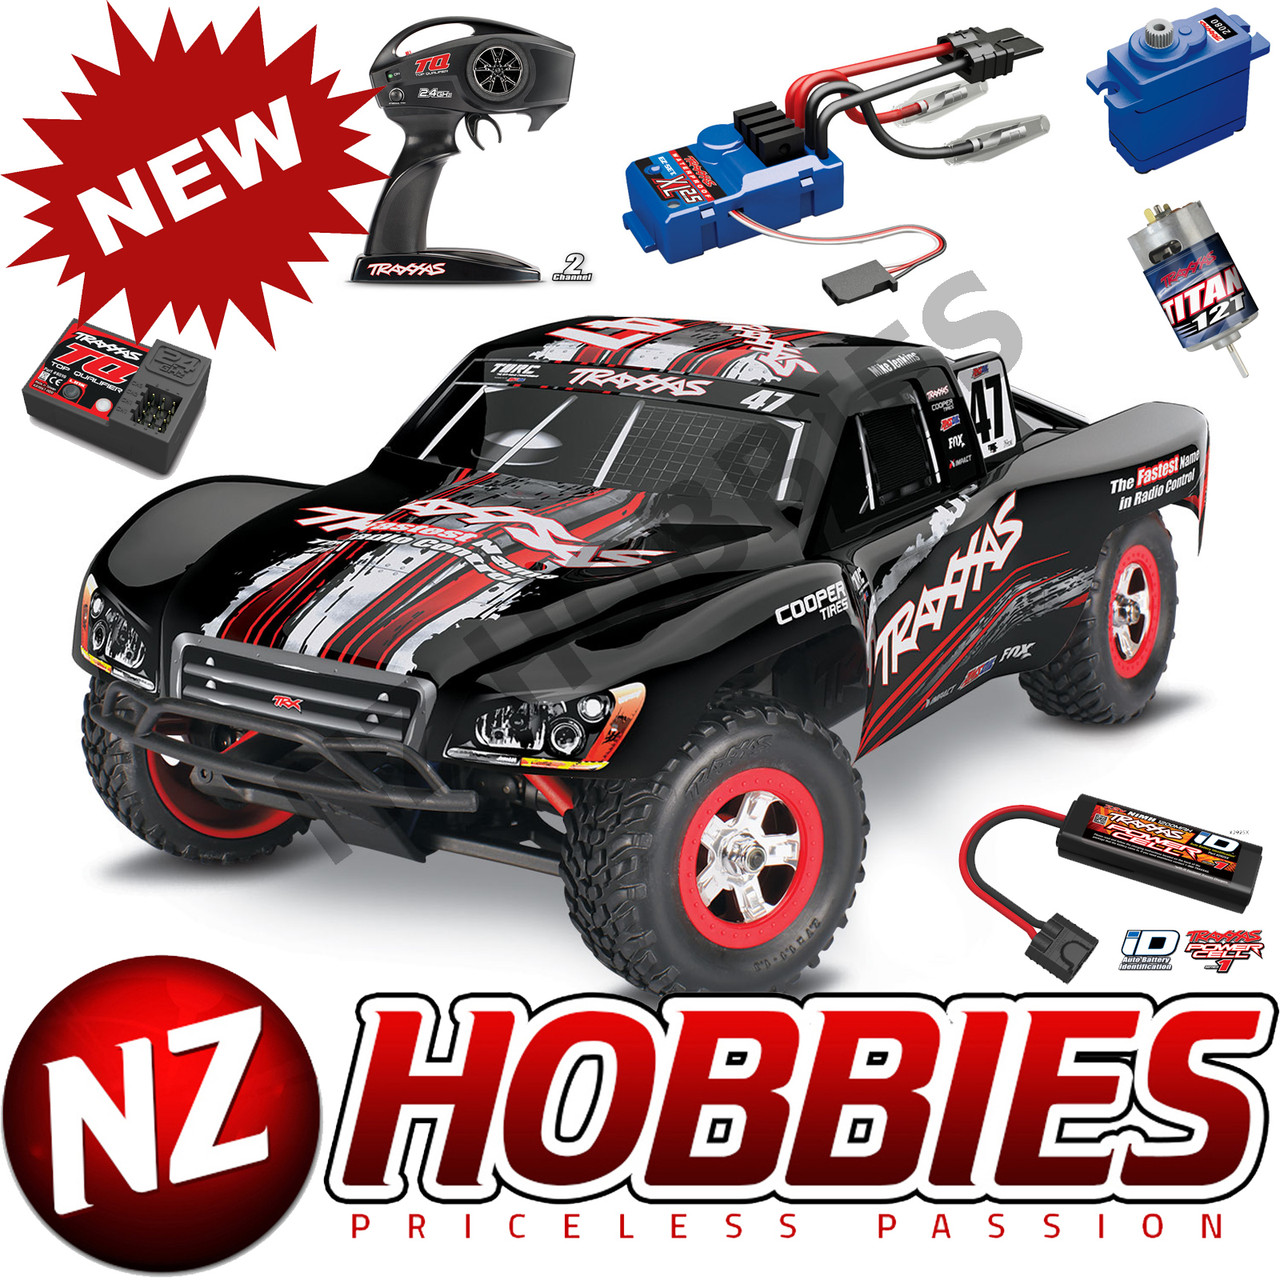 Slash®: 1/16-Scale Pro 4X4 Short Course Racing Truck with TQ™ 2.4